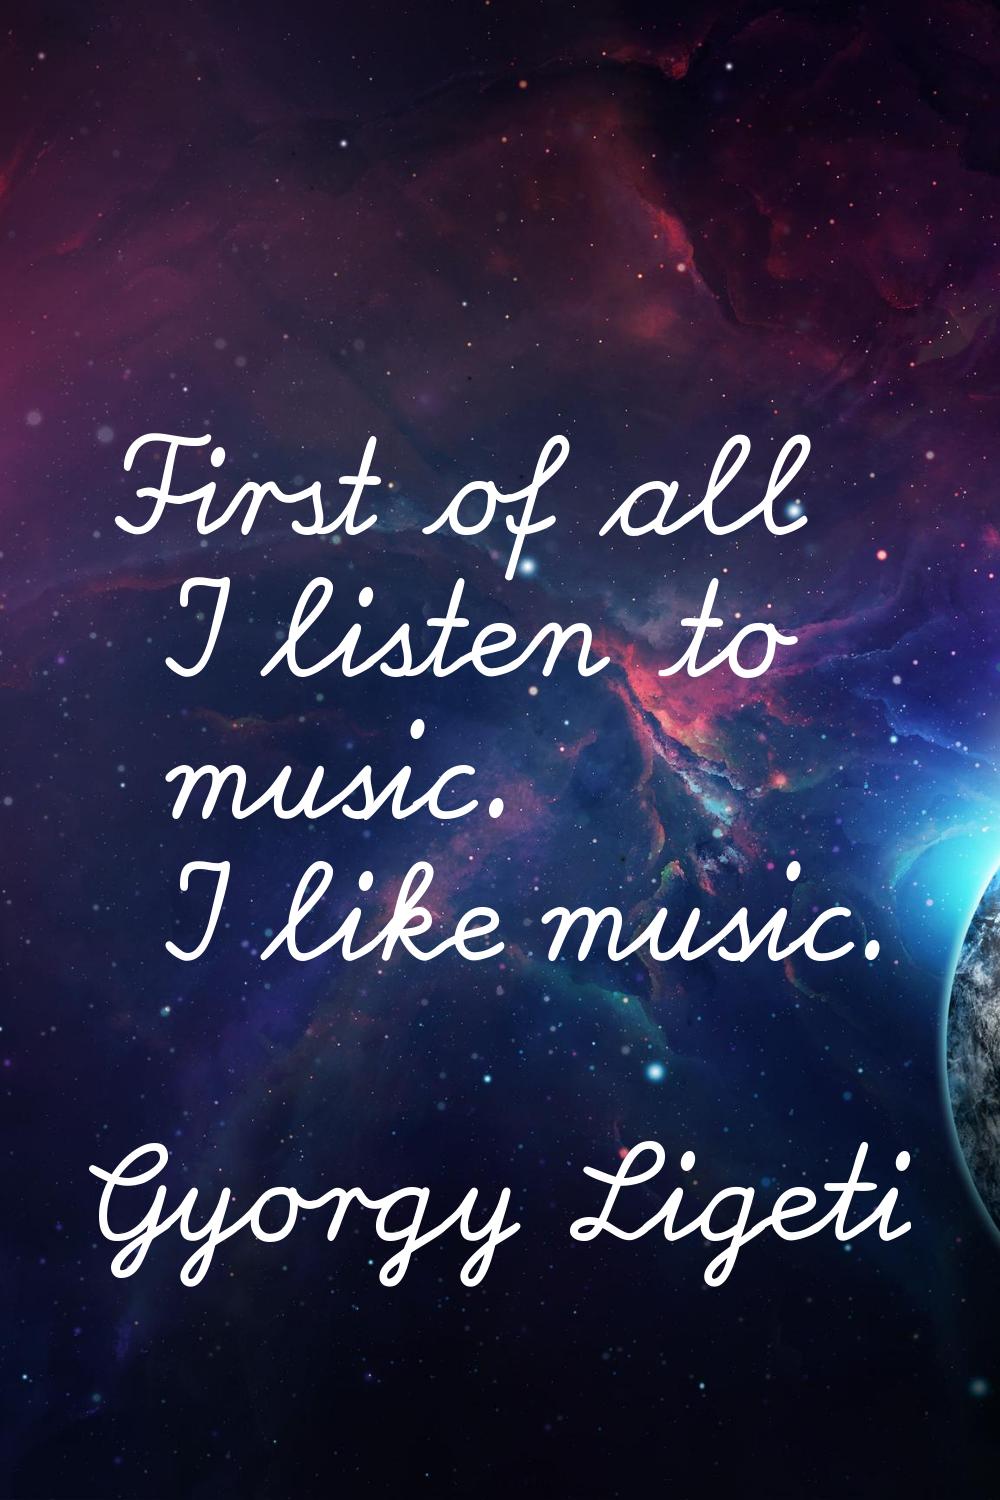 First of all I listen to music. I like music.